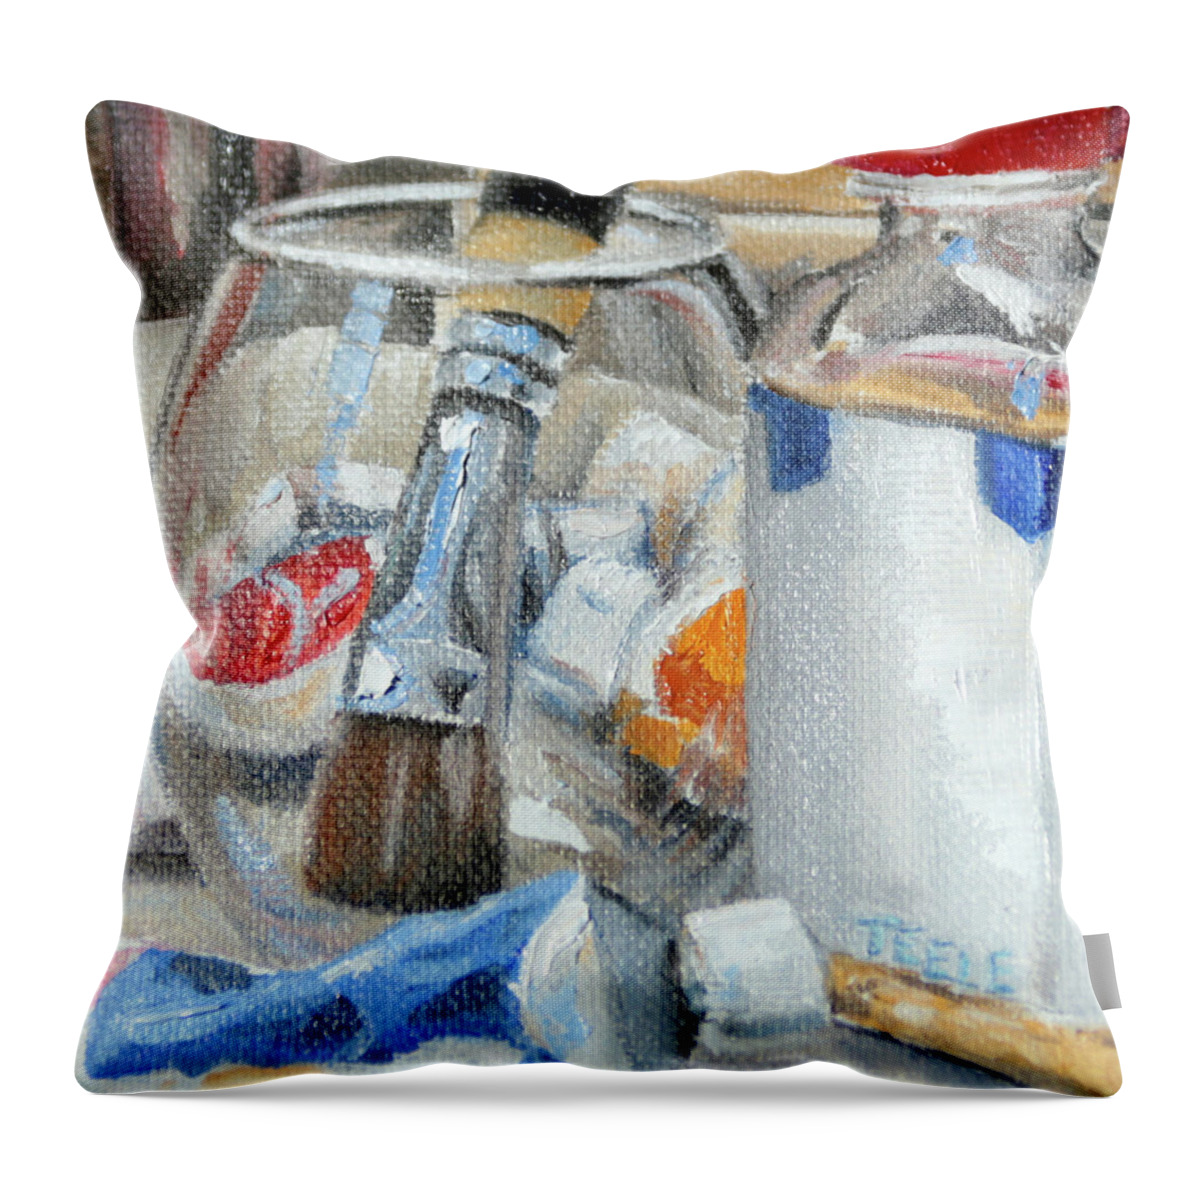 Paints Throw Pillow featuring the painting Studio Treats by Trina Teele